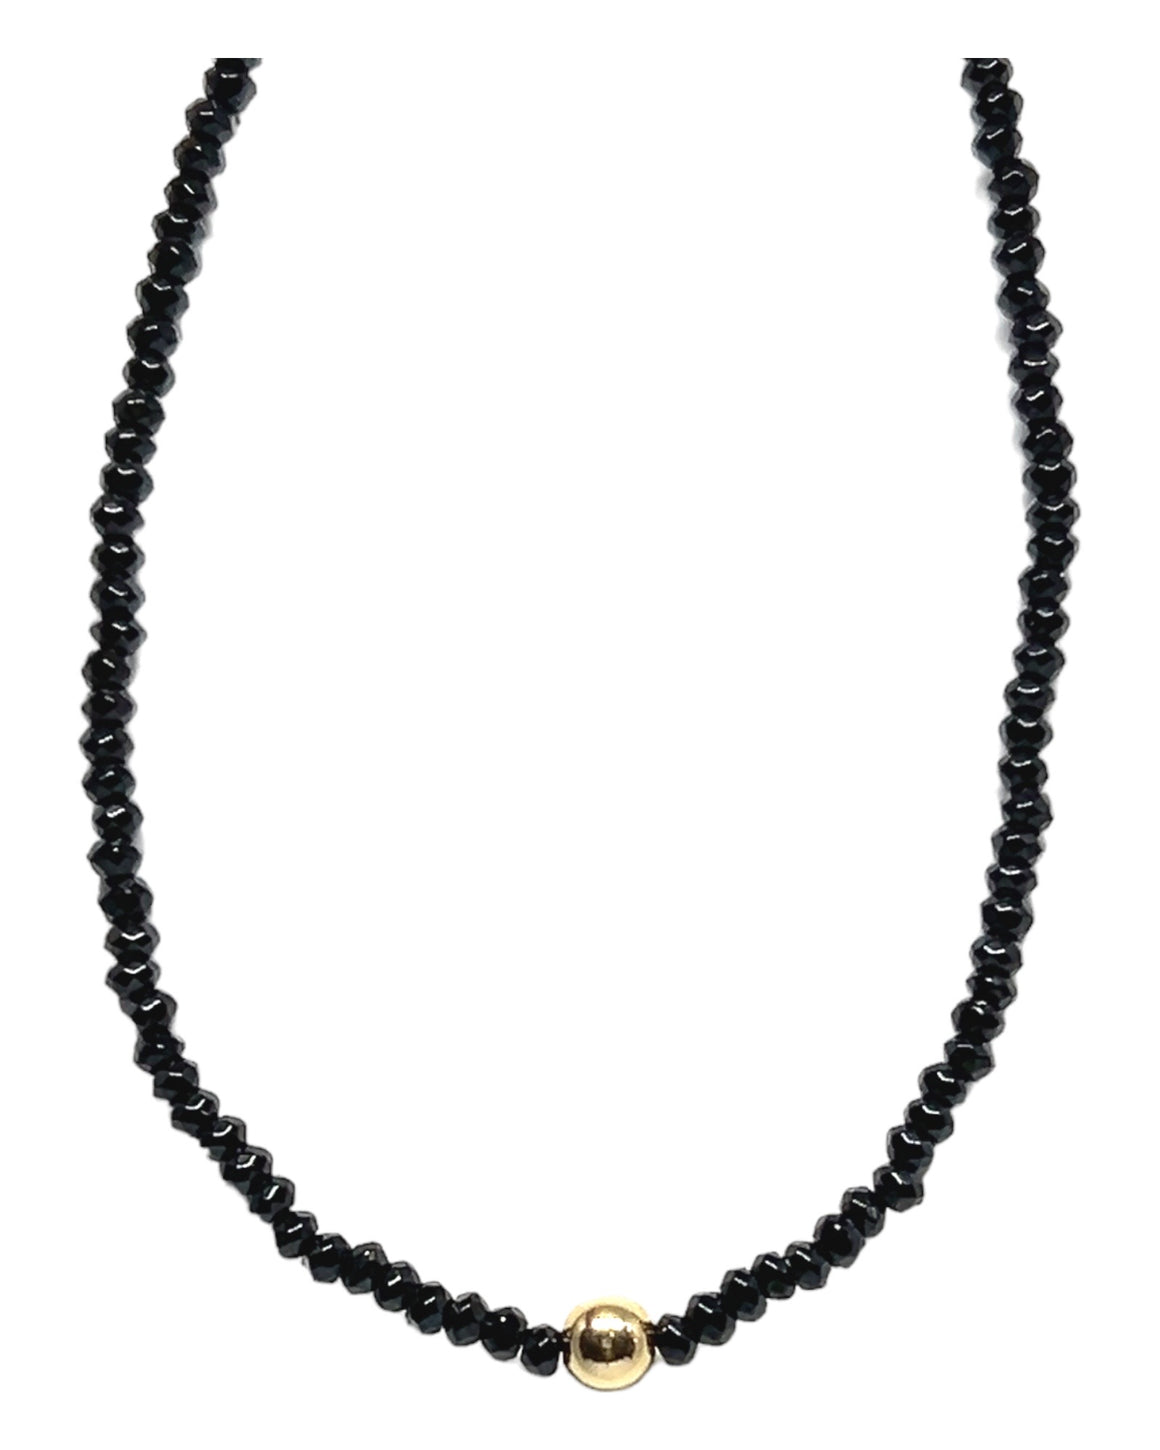 Faceted Black Spinel Necklace w/ Gold Ball